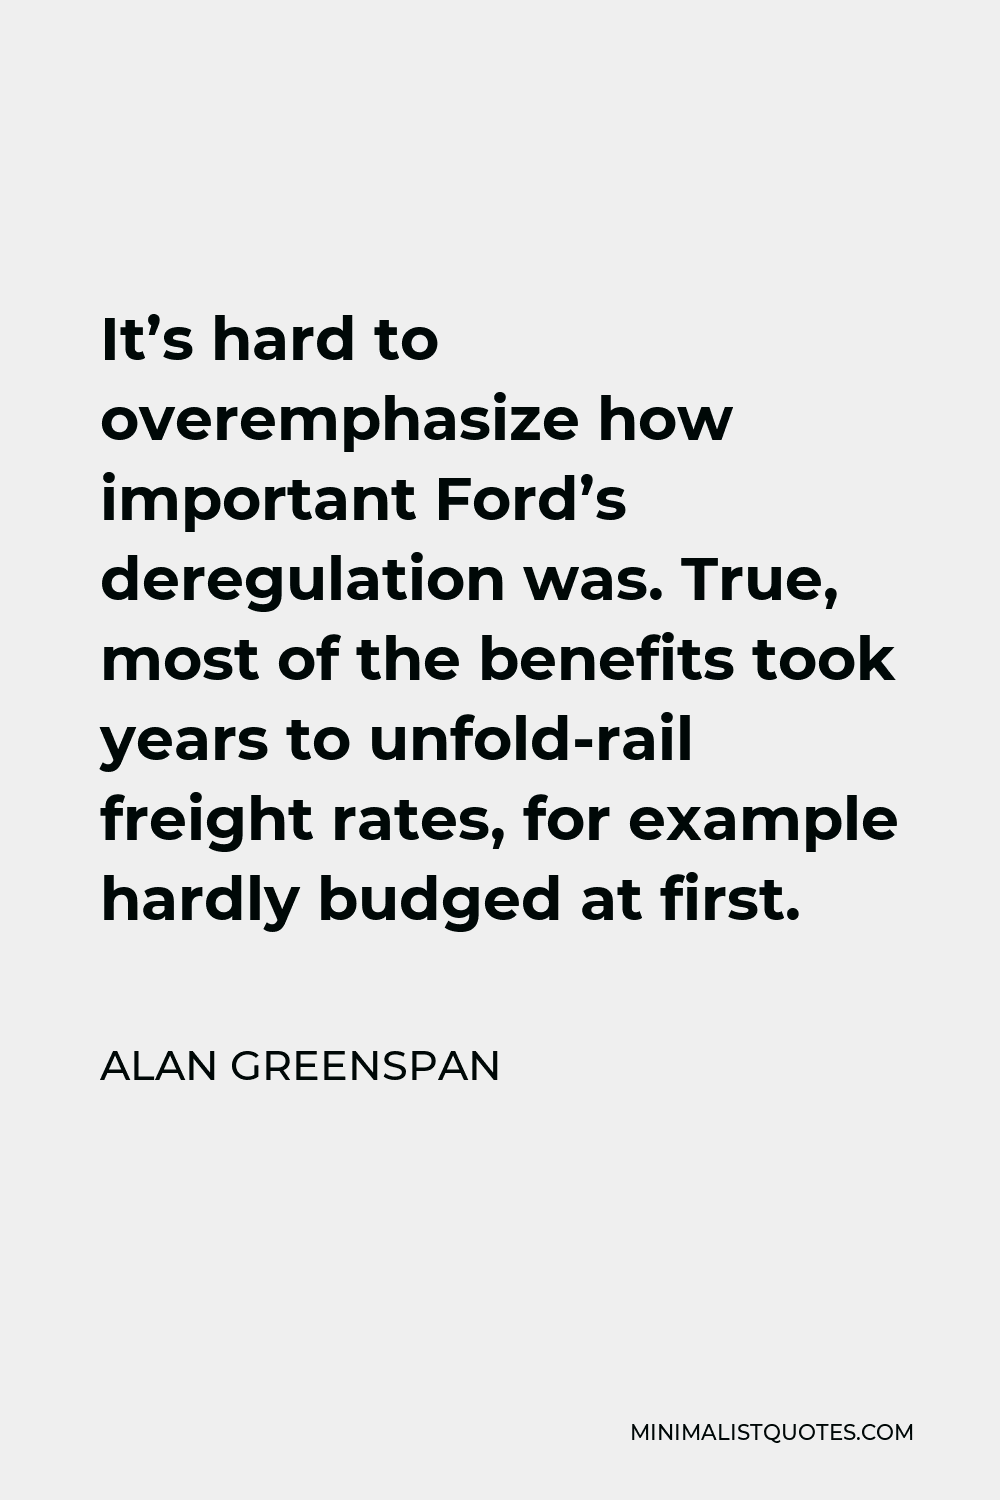 Alan Greenspan Quote - It’s hard to overemphasize how important Ford’s deregulation was. True, most of the benefits took years to unfold-rail freight rates, for example hardly budged at first.